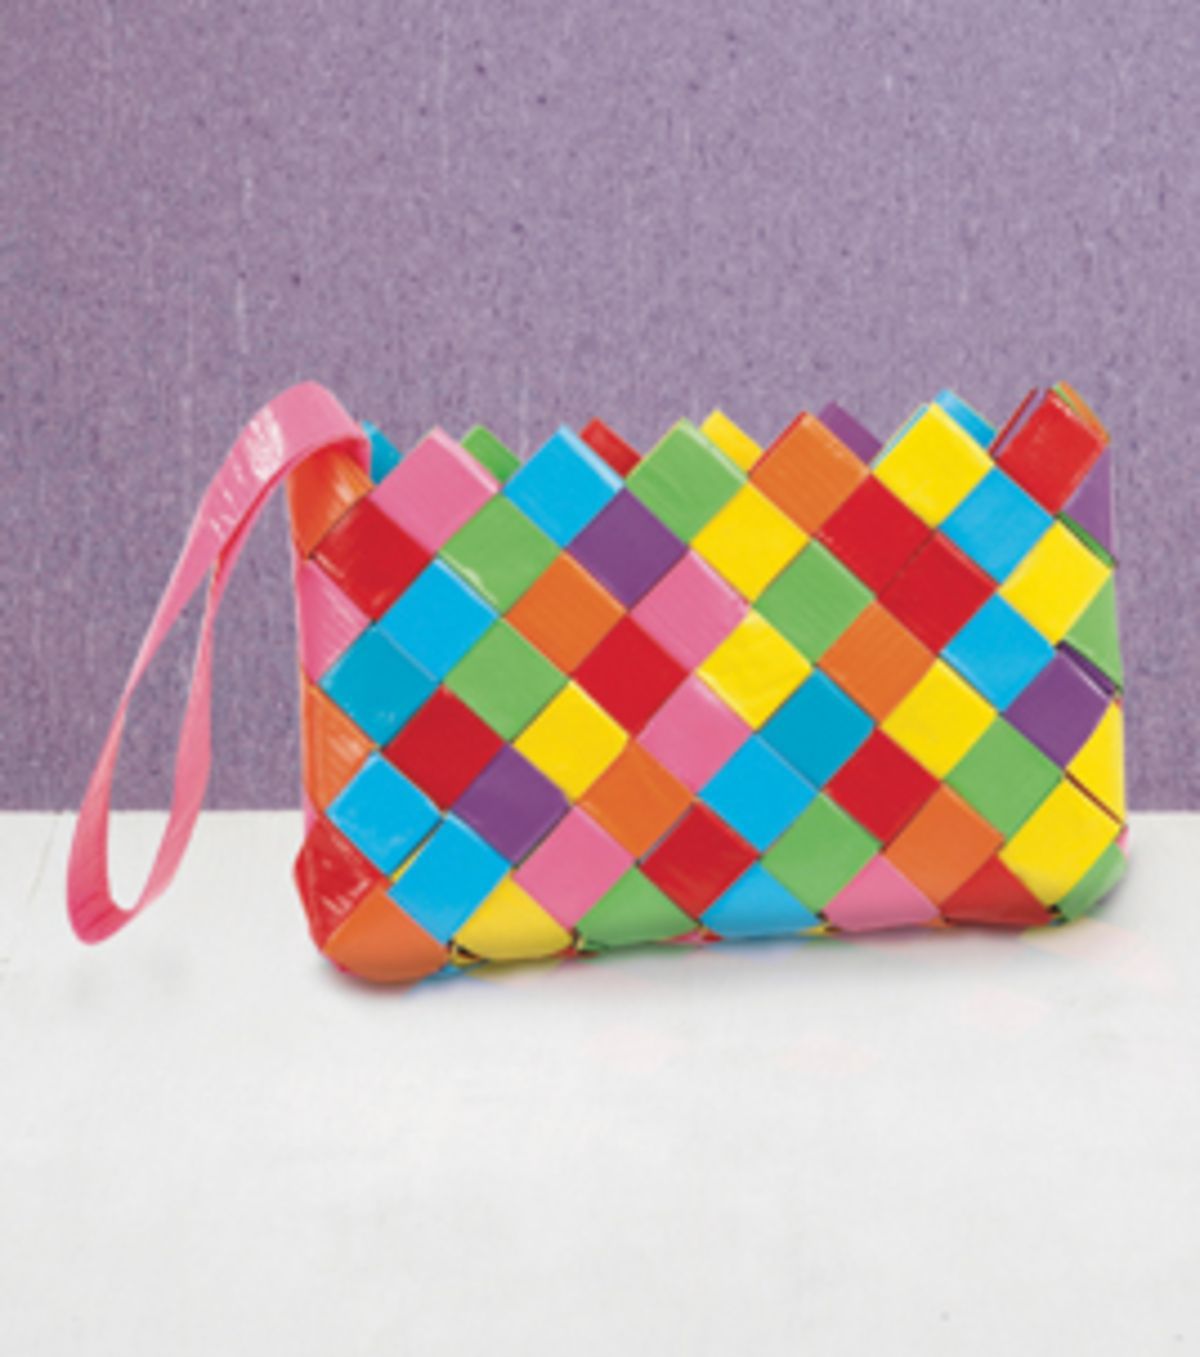 Love this! Chain-link duct tape clutch :)